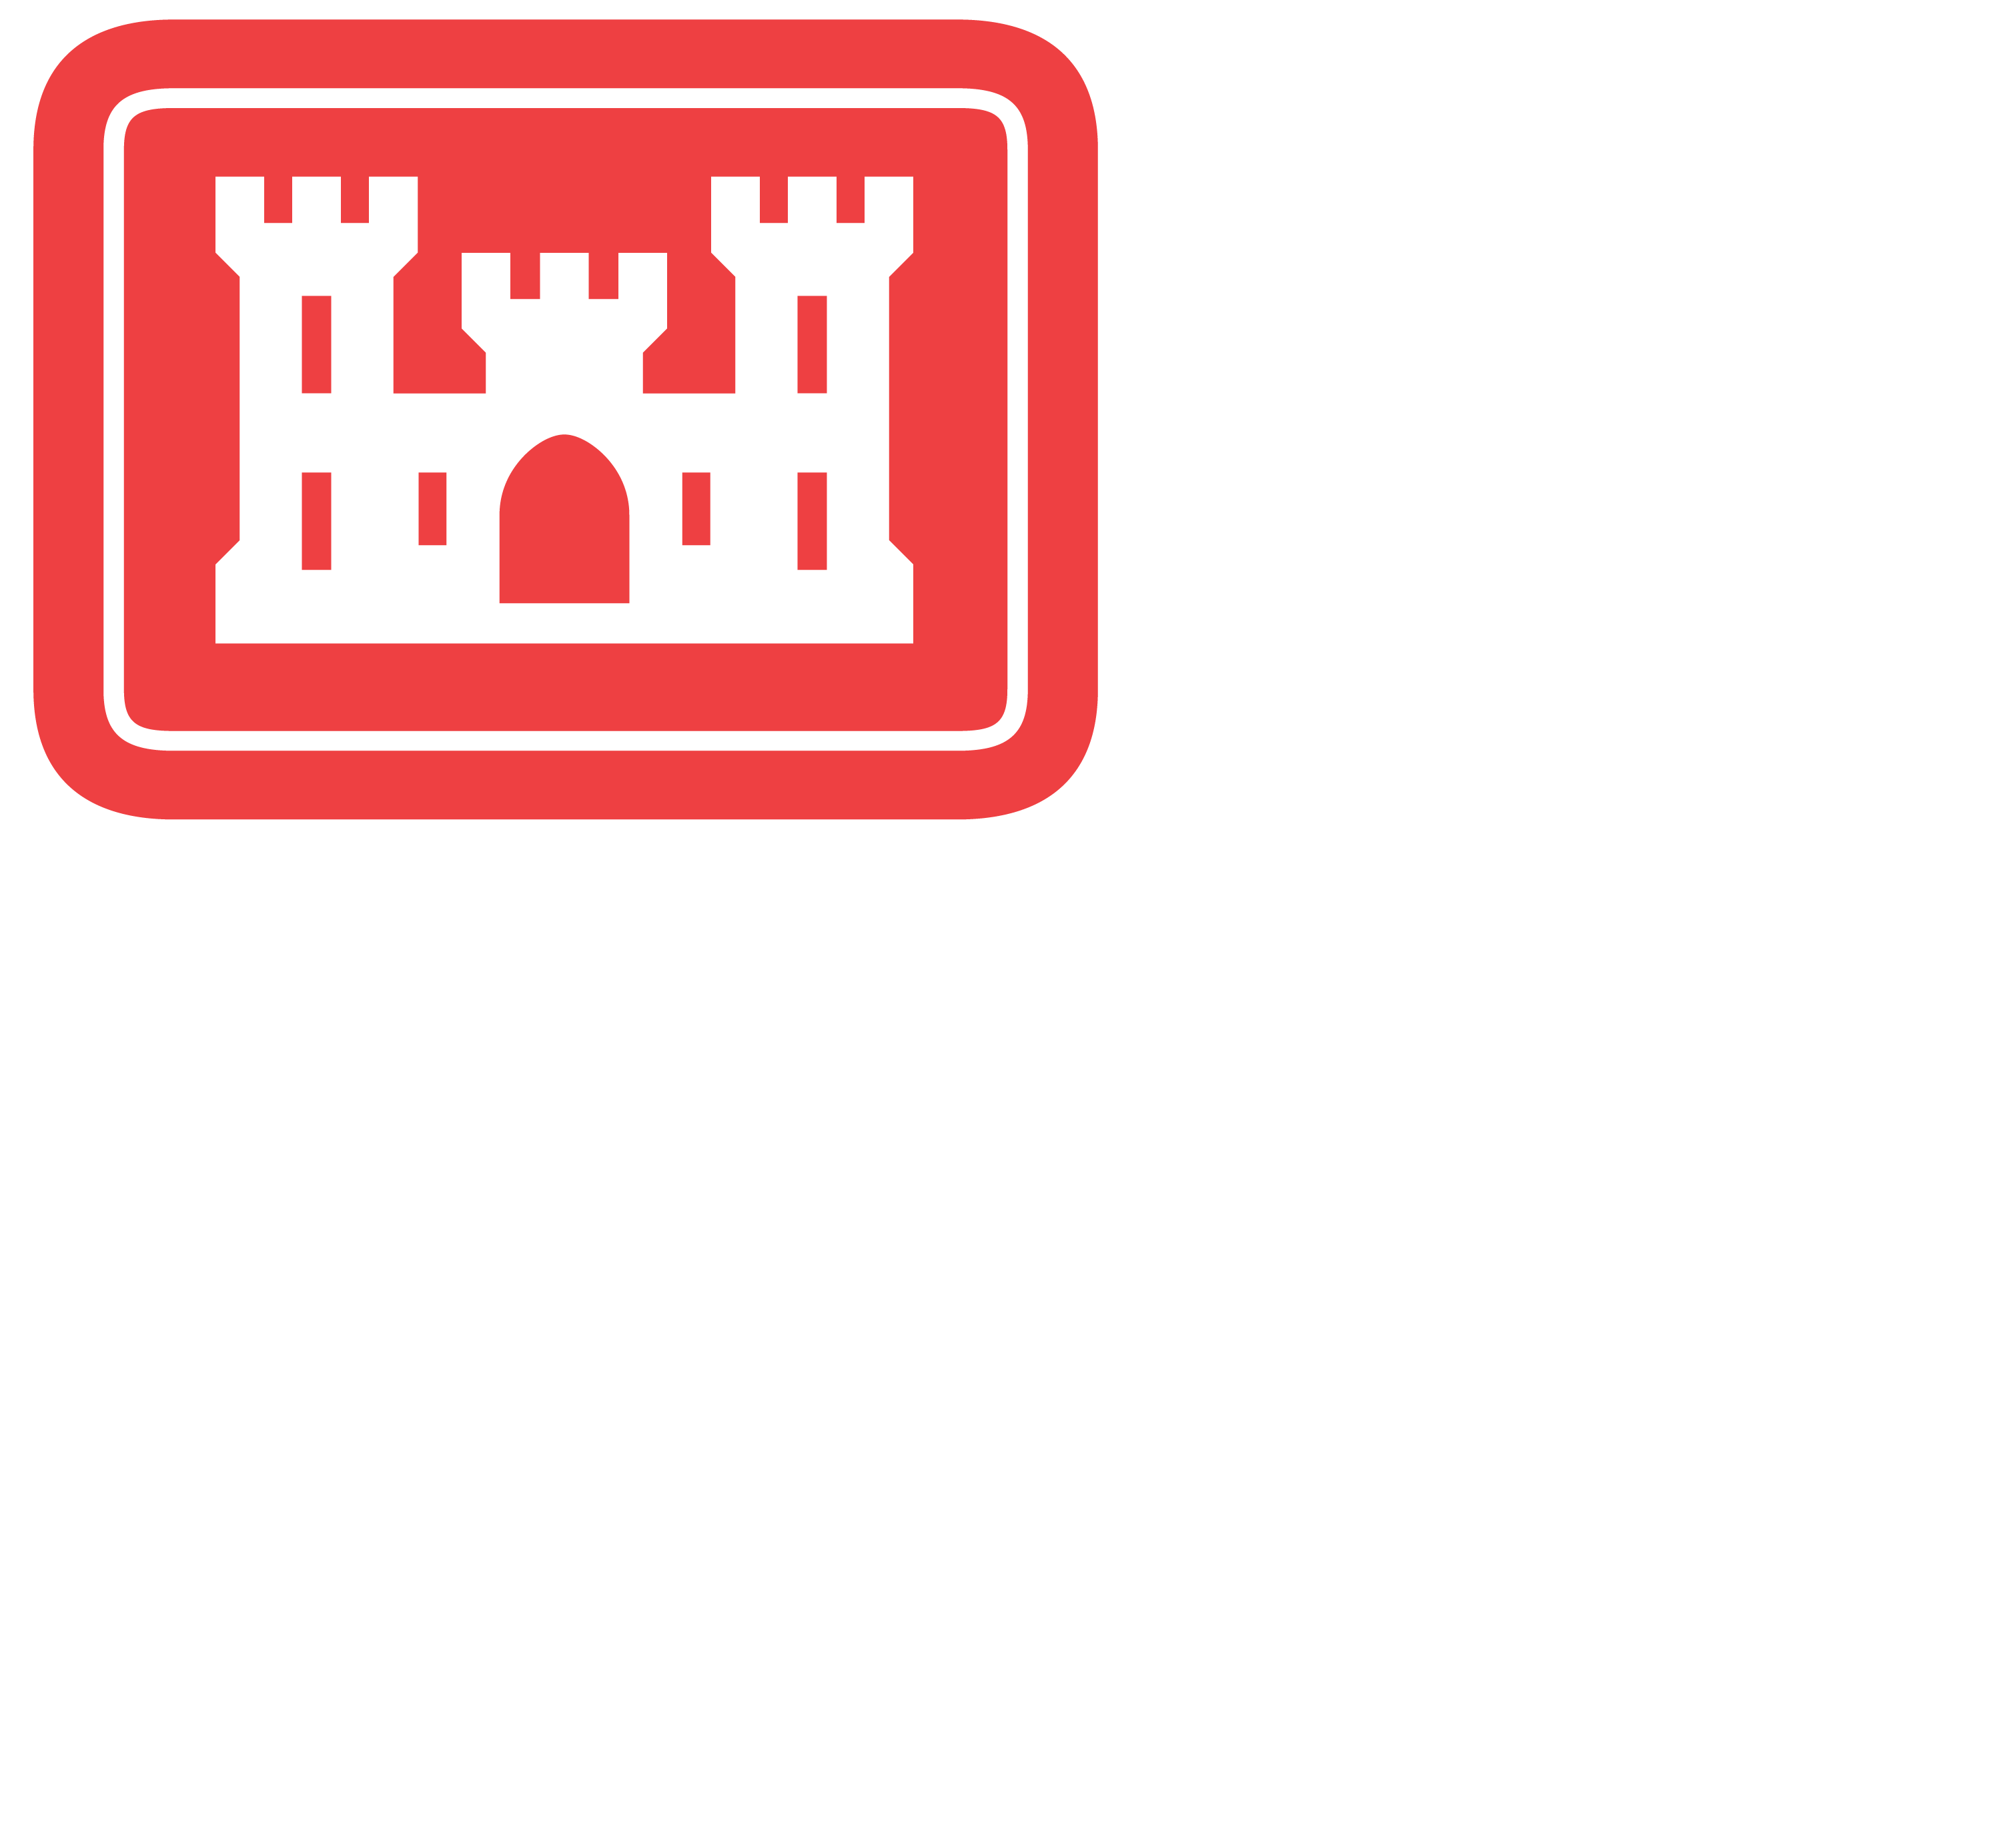 us army corps of engineers logo - white castle on red background